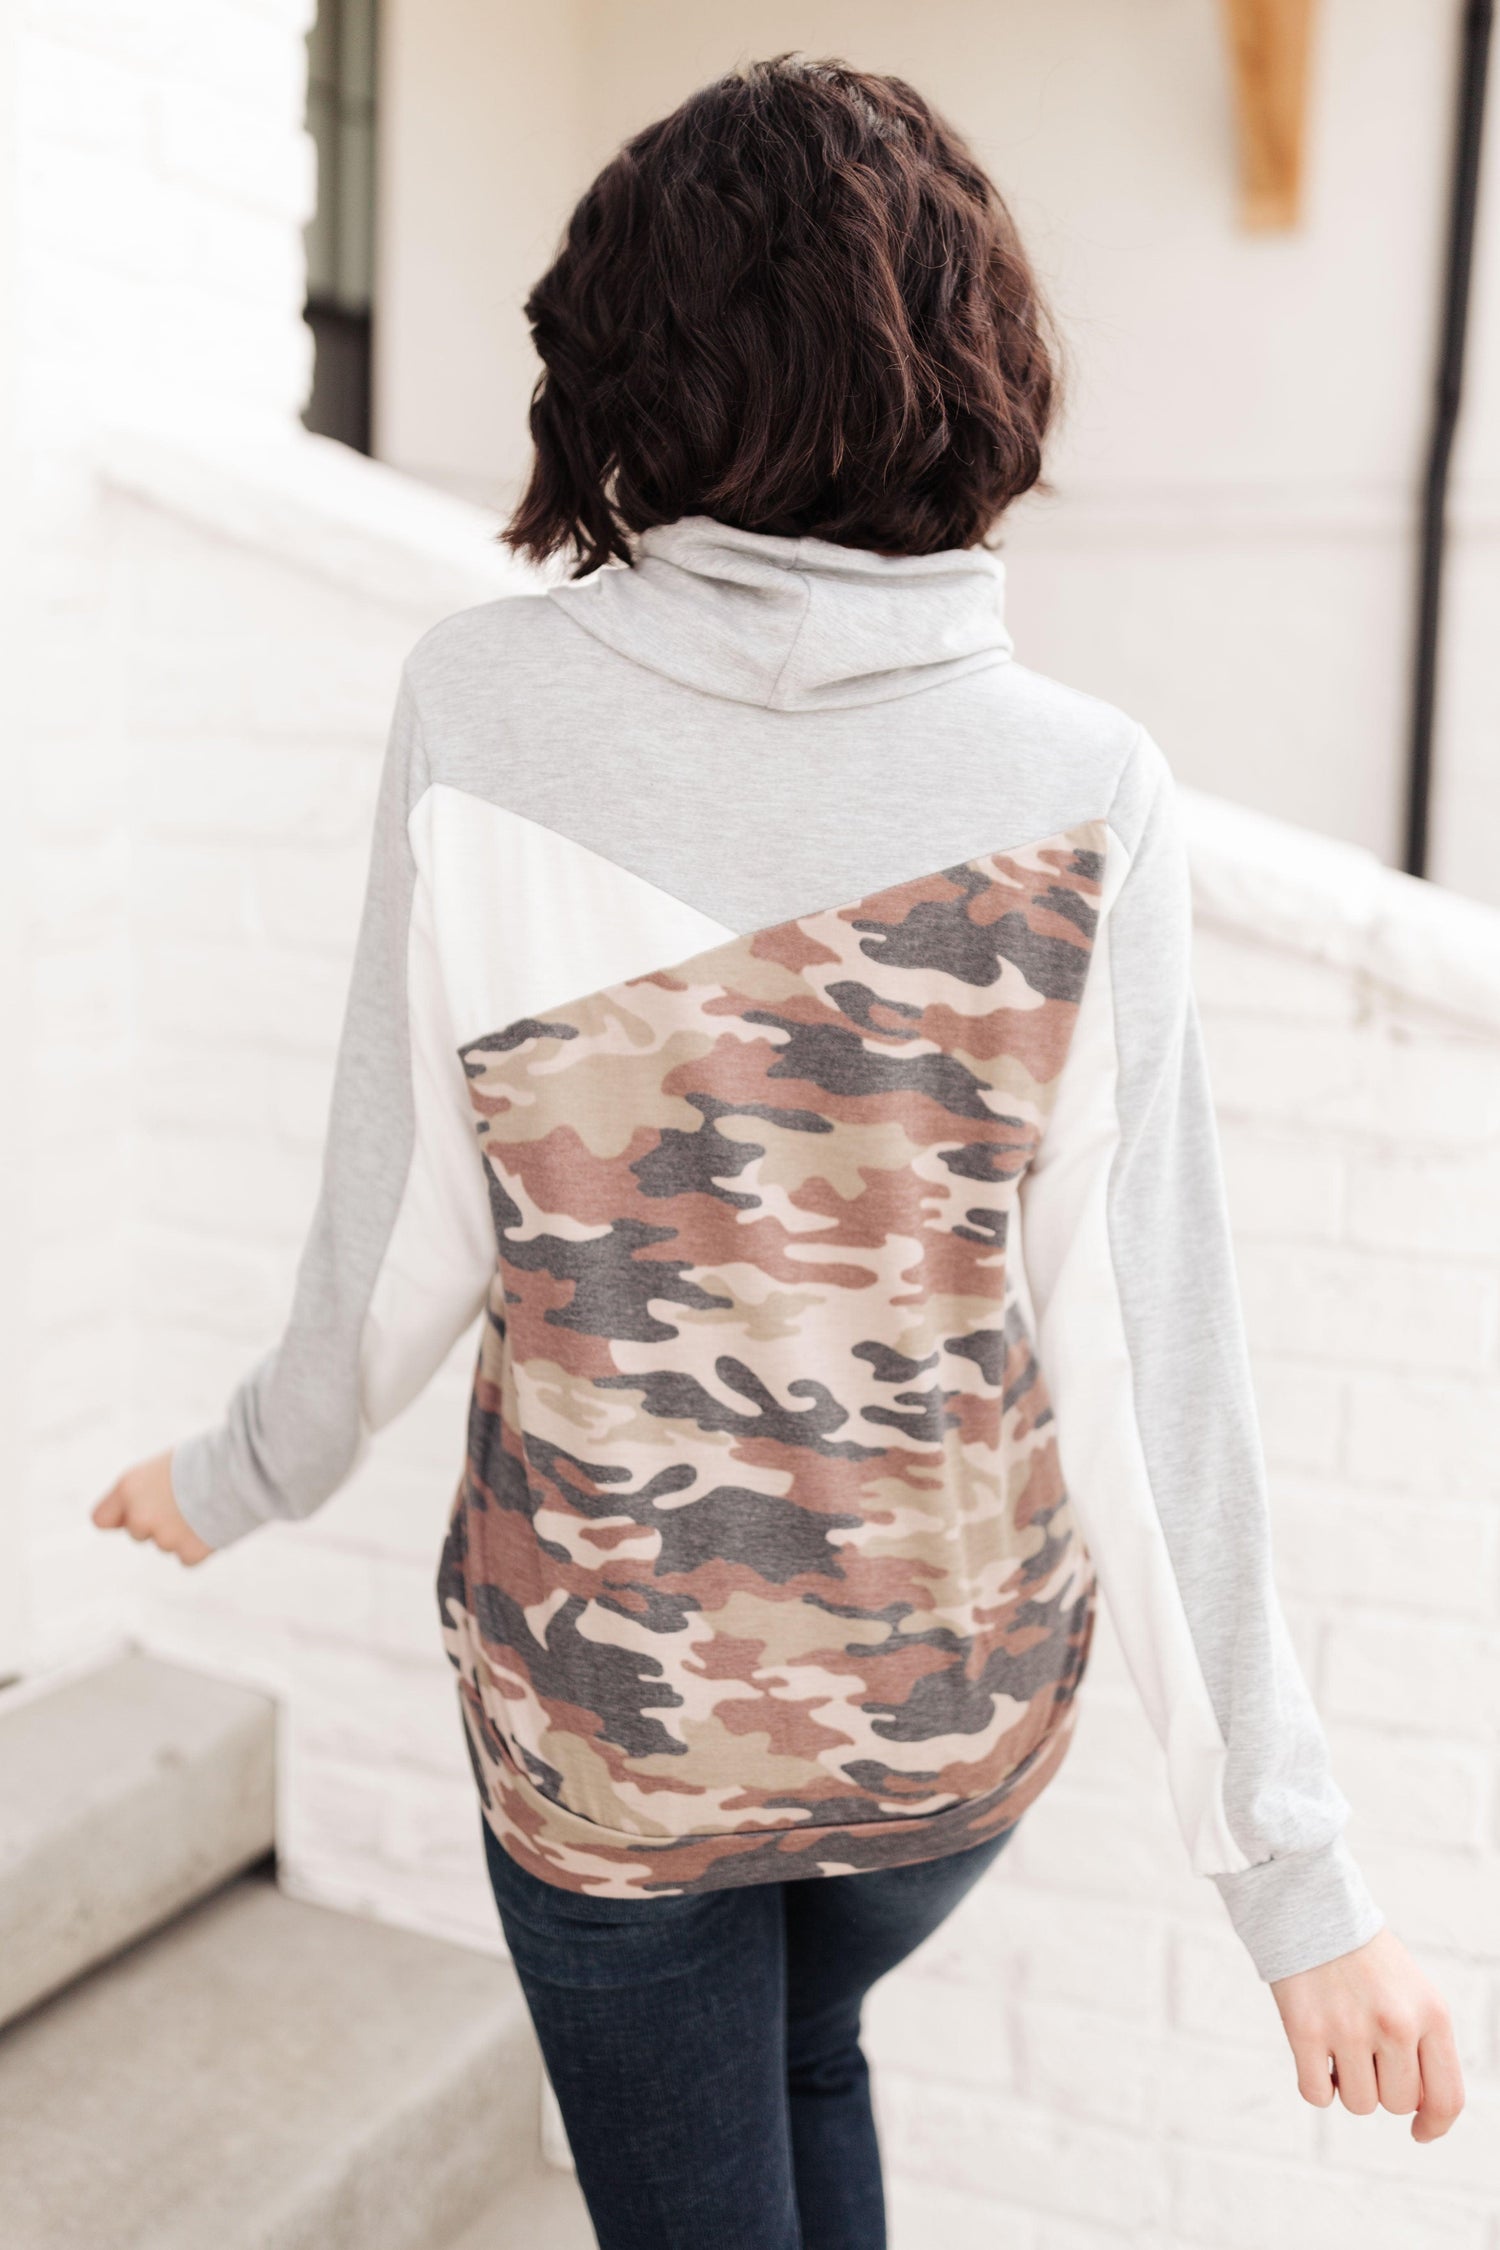 All About Adventure Top in Camo - Alexander Jane Boutique  Womens